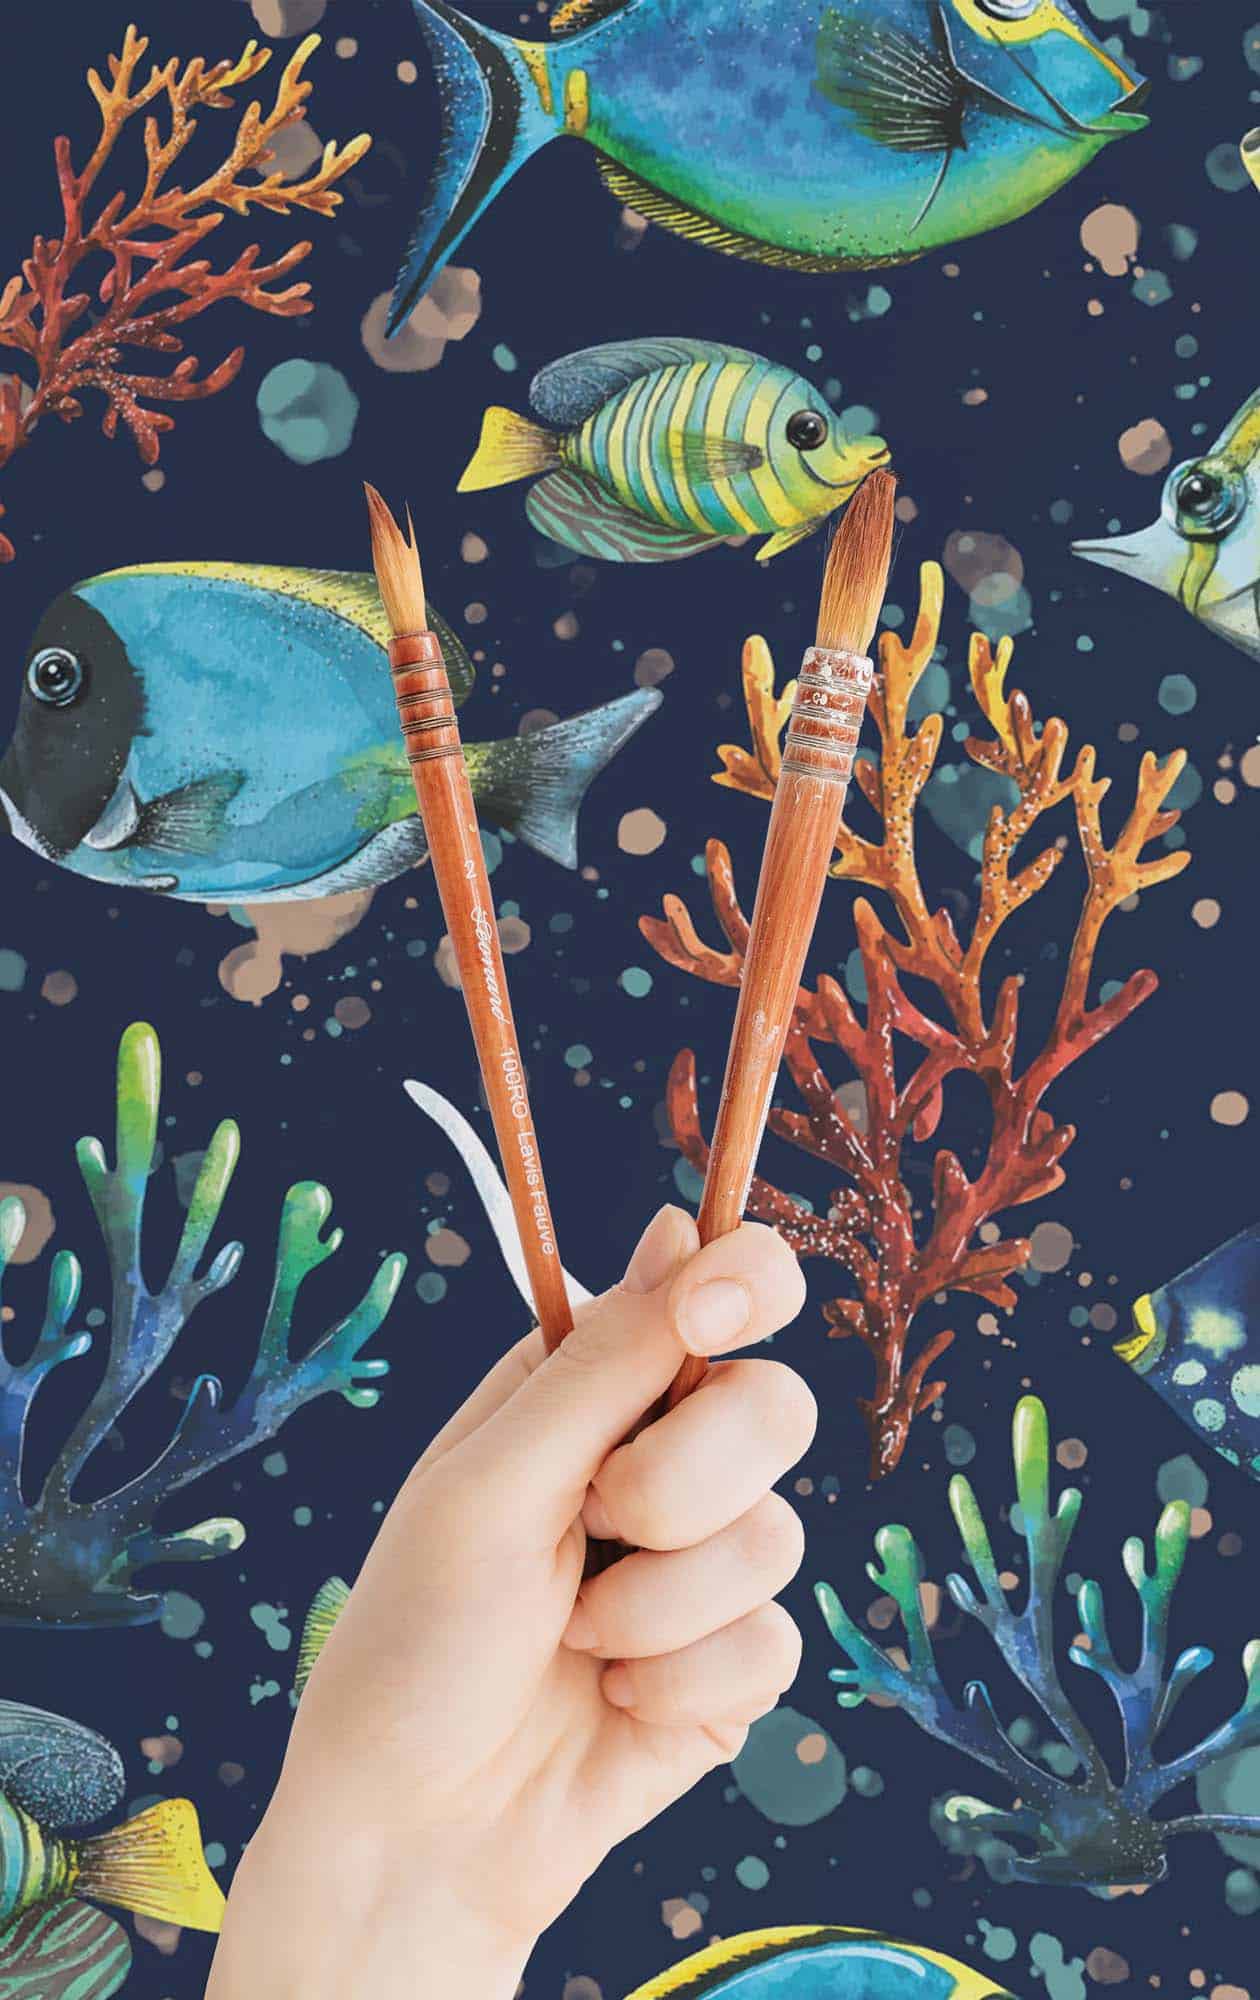 A hand holding two brushes against a background of fish and coral. - Koi fish